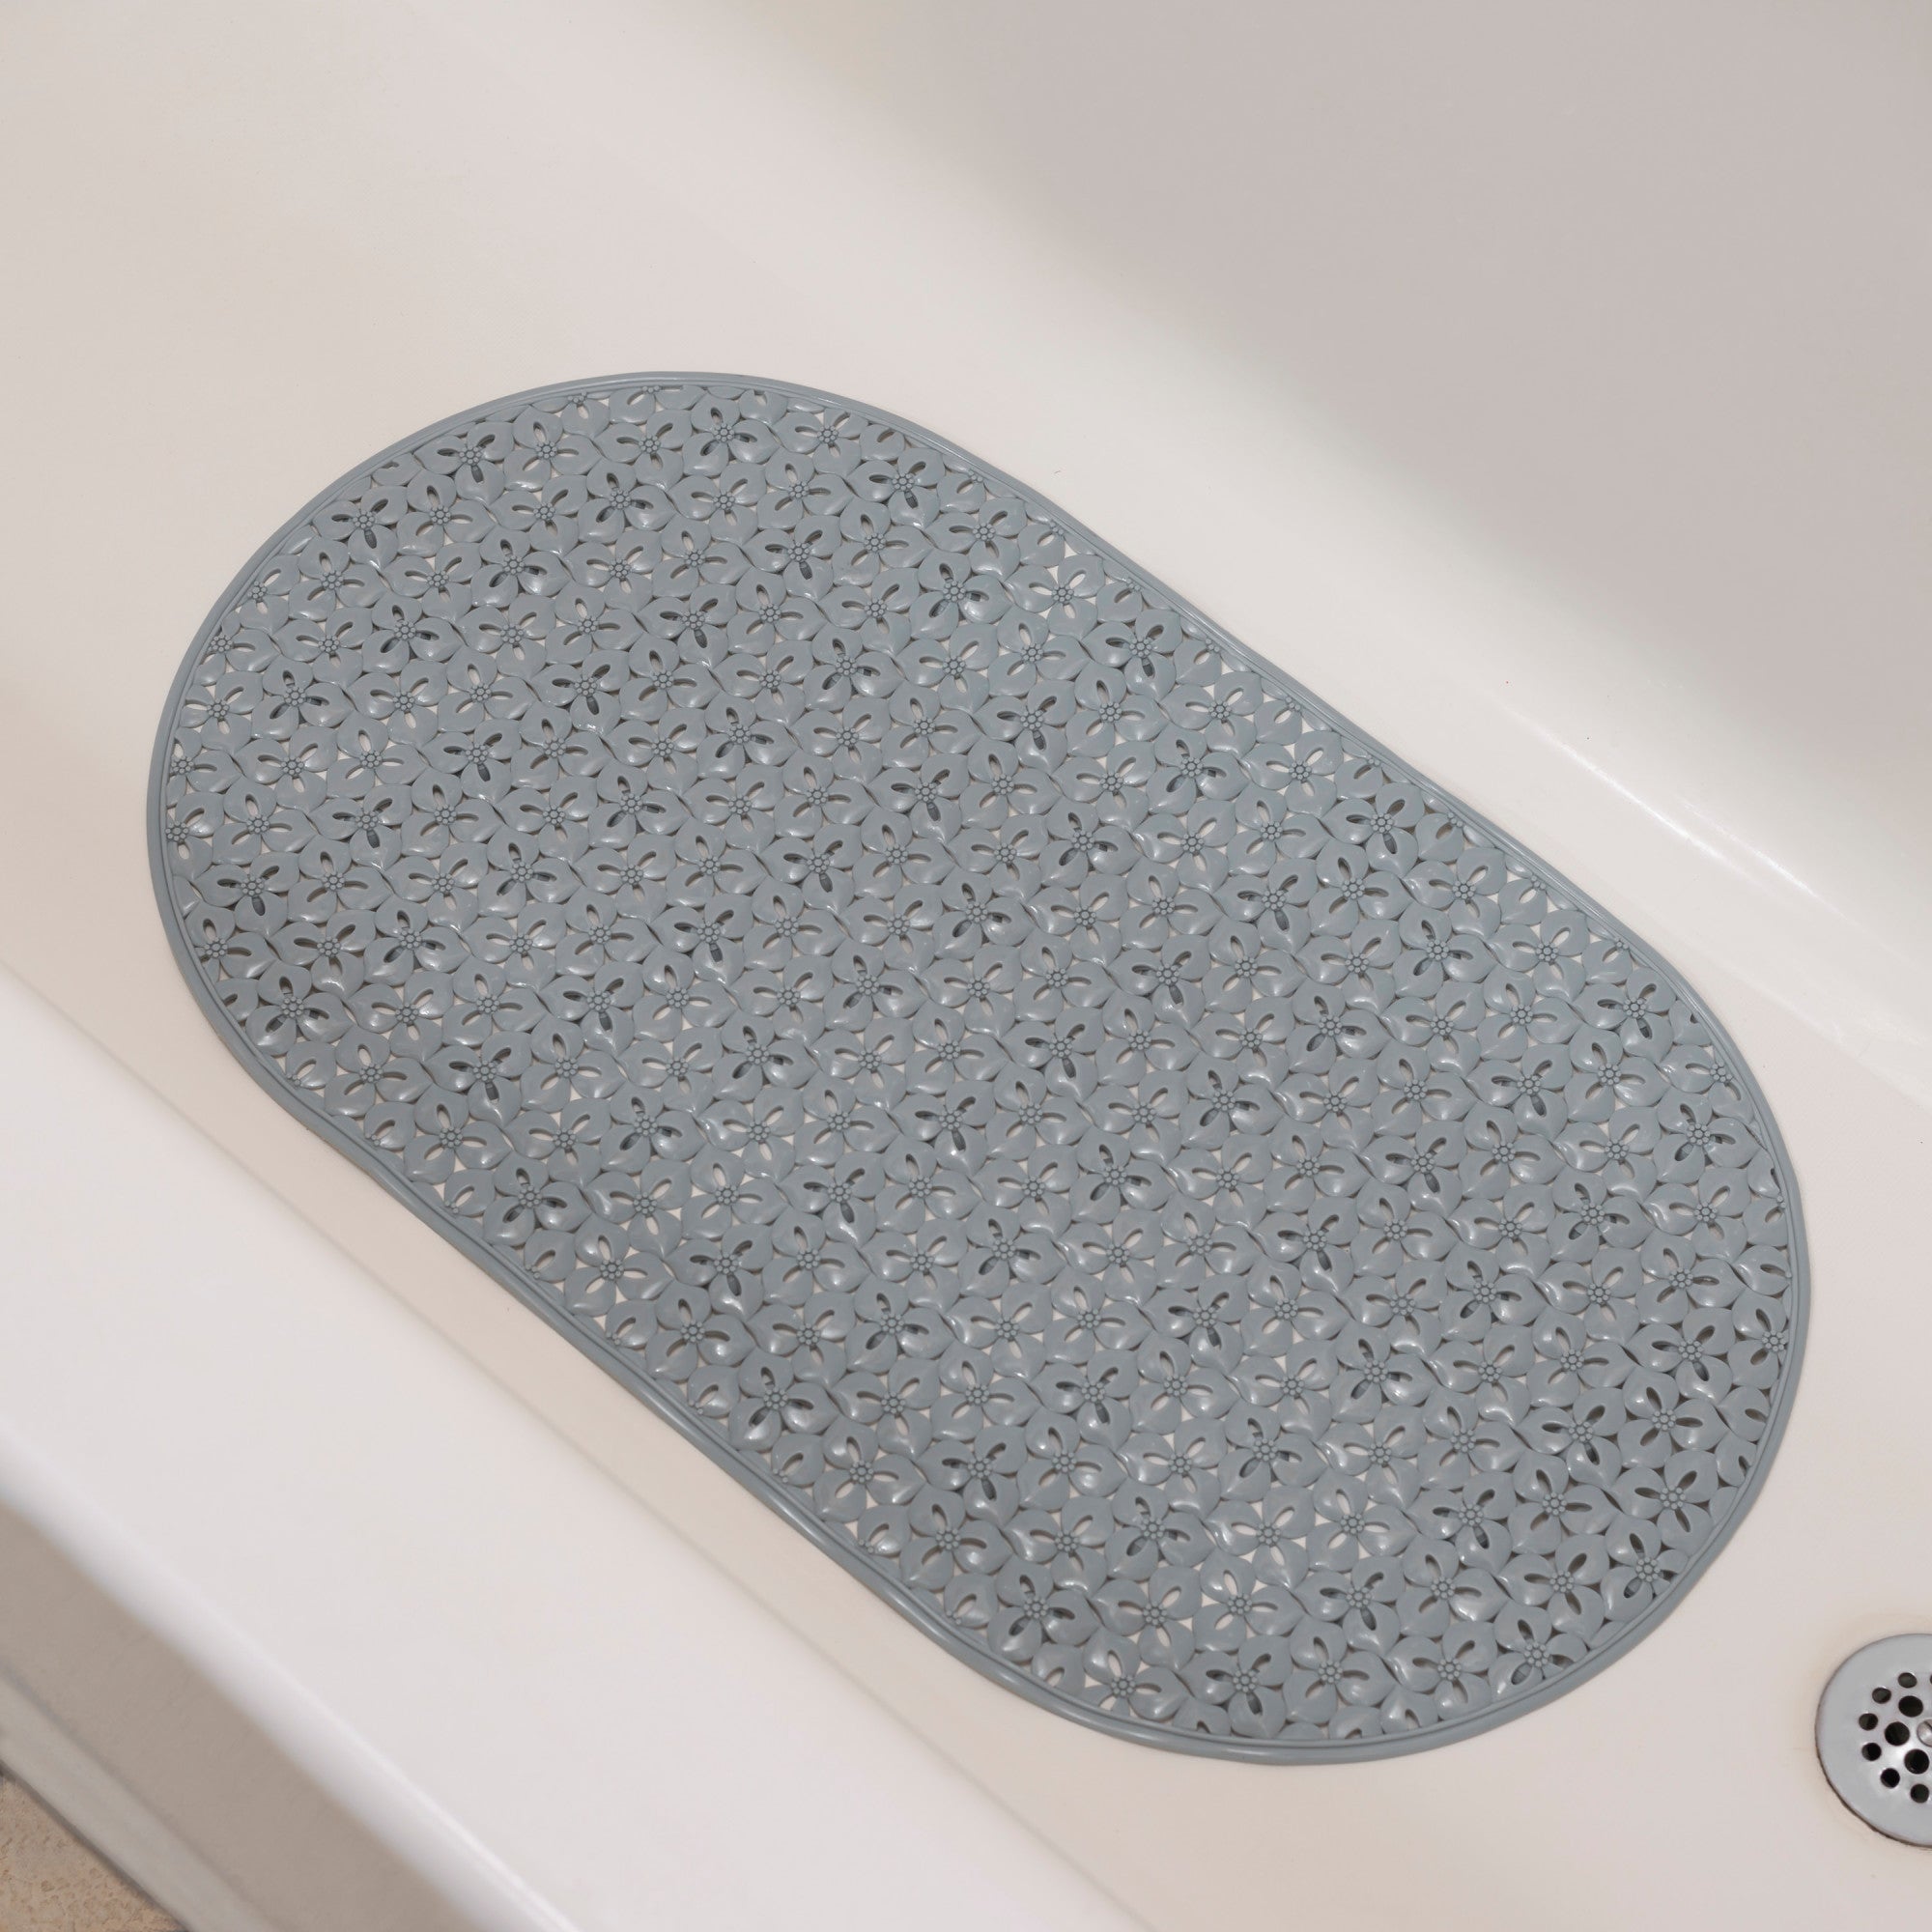 Home Basics Oval Non-Skid PVC Bath Mat, (15-inch x 15-inch) - Assorted Colors